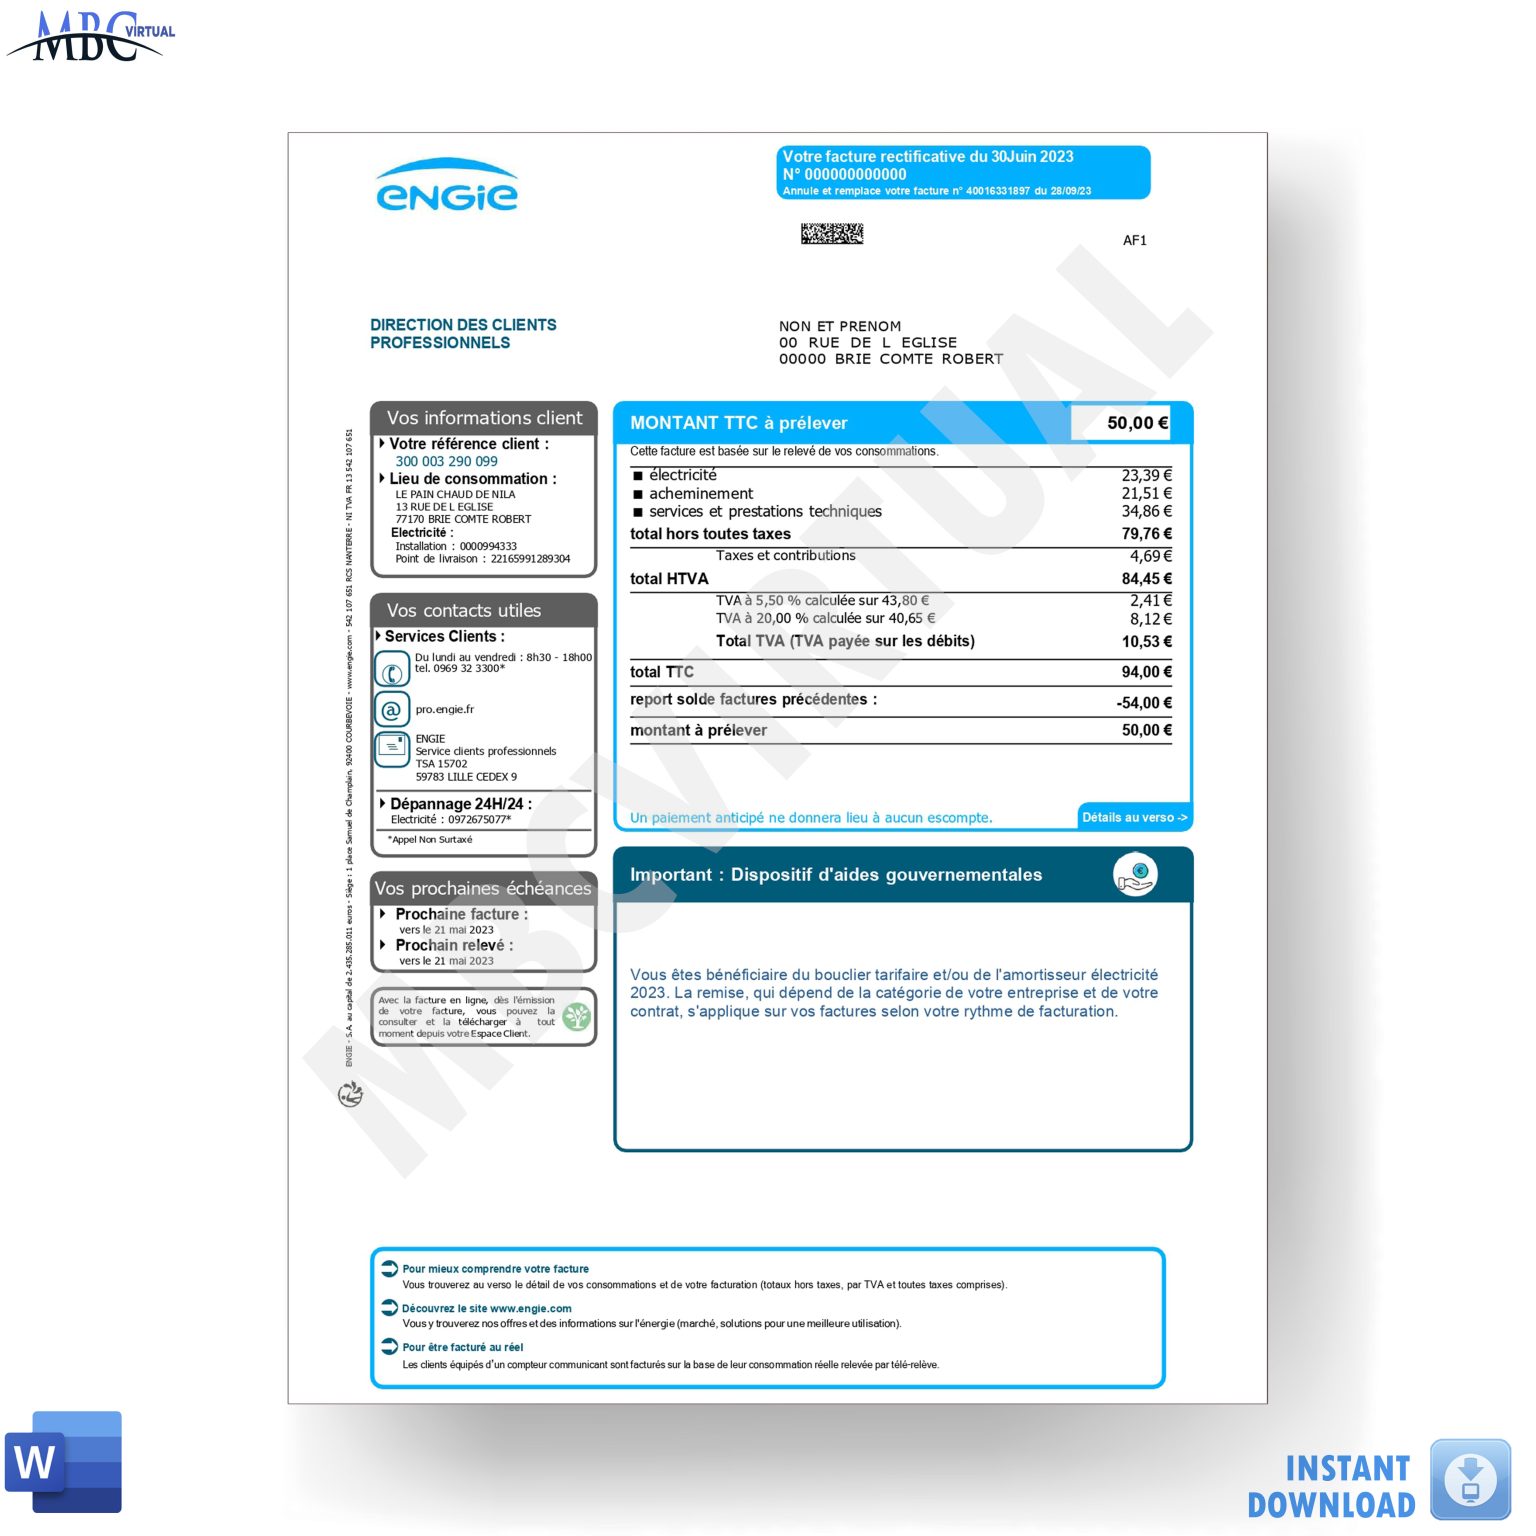 New 2023 Engie Bill Electricity Template - MbcVirtual